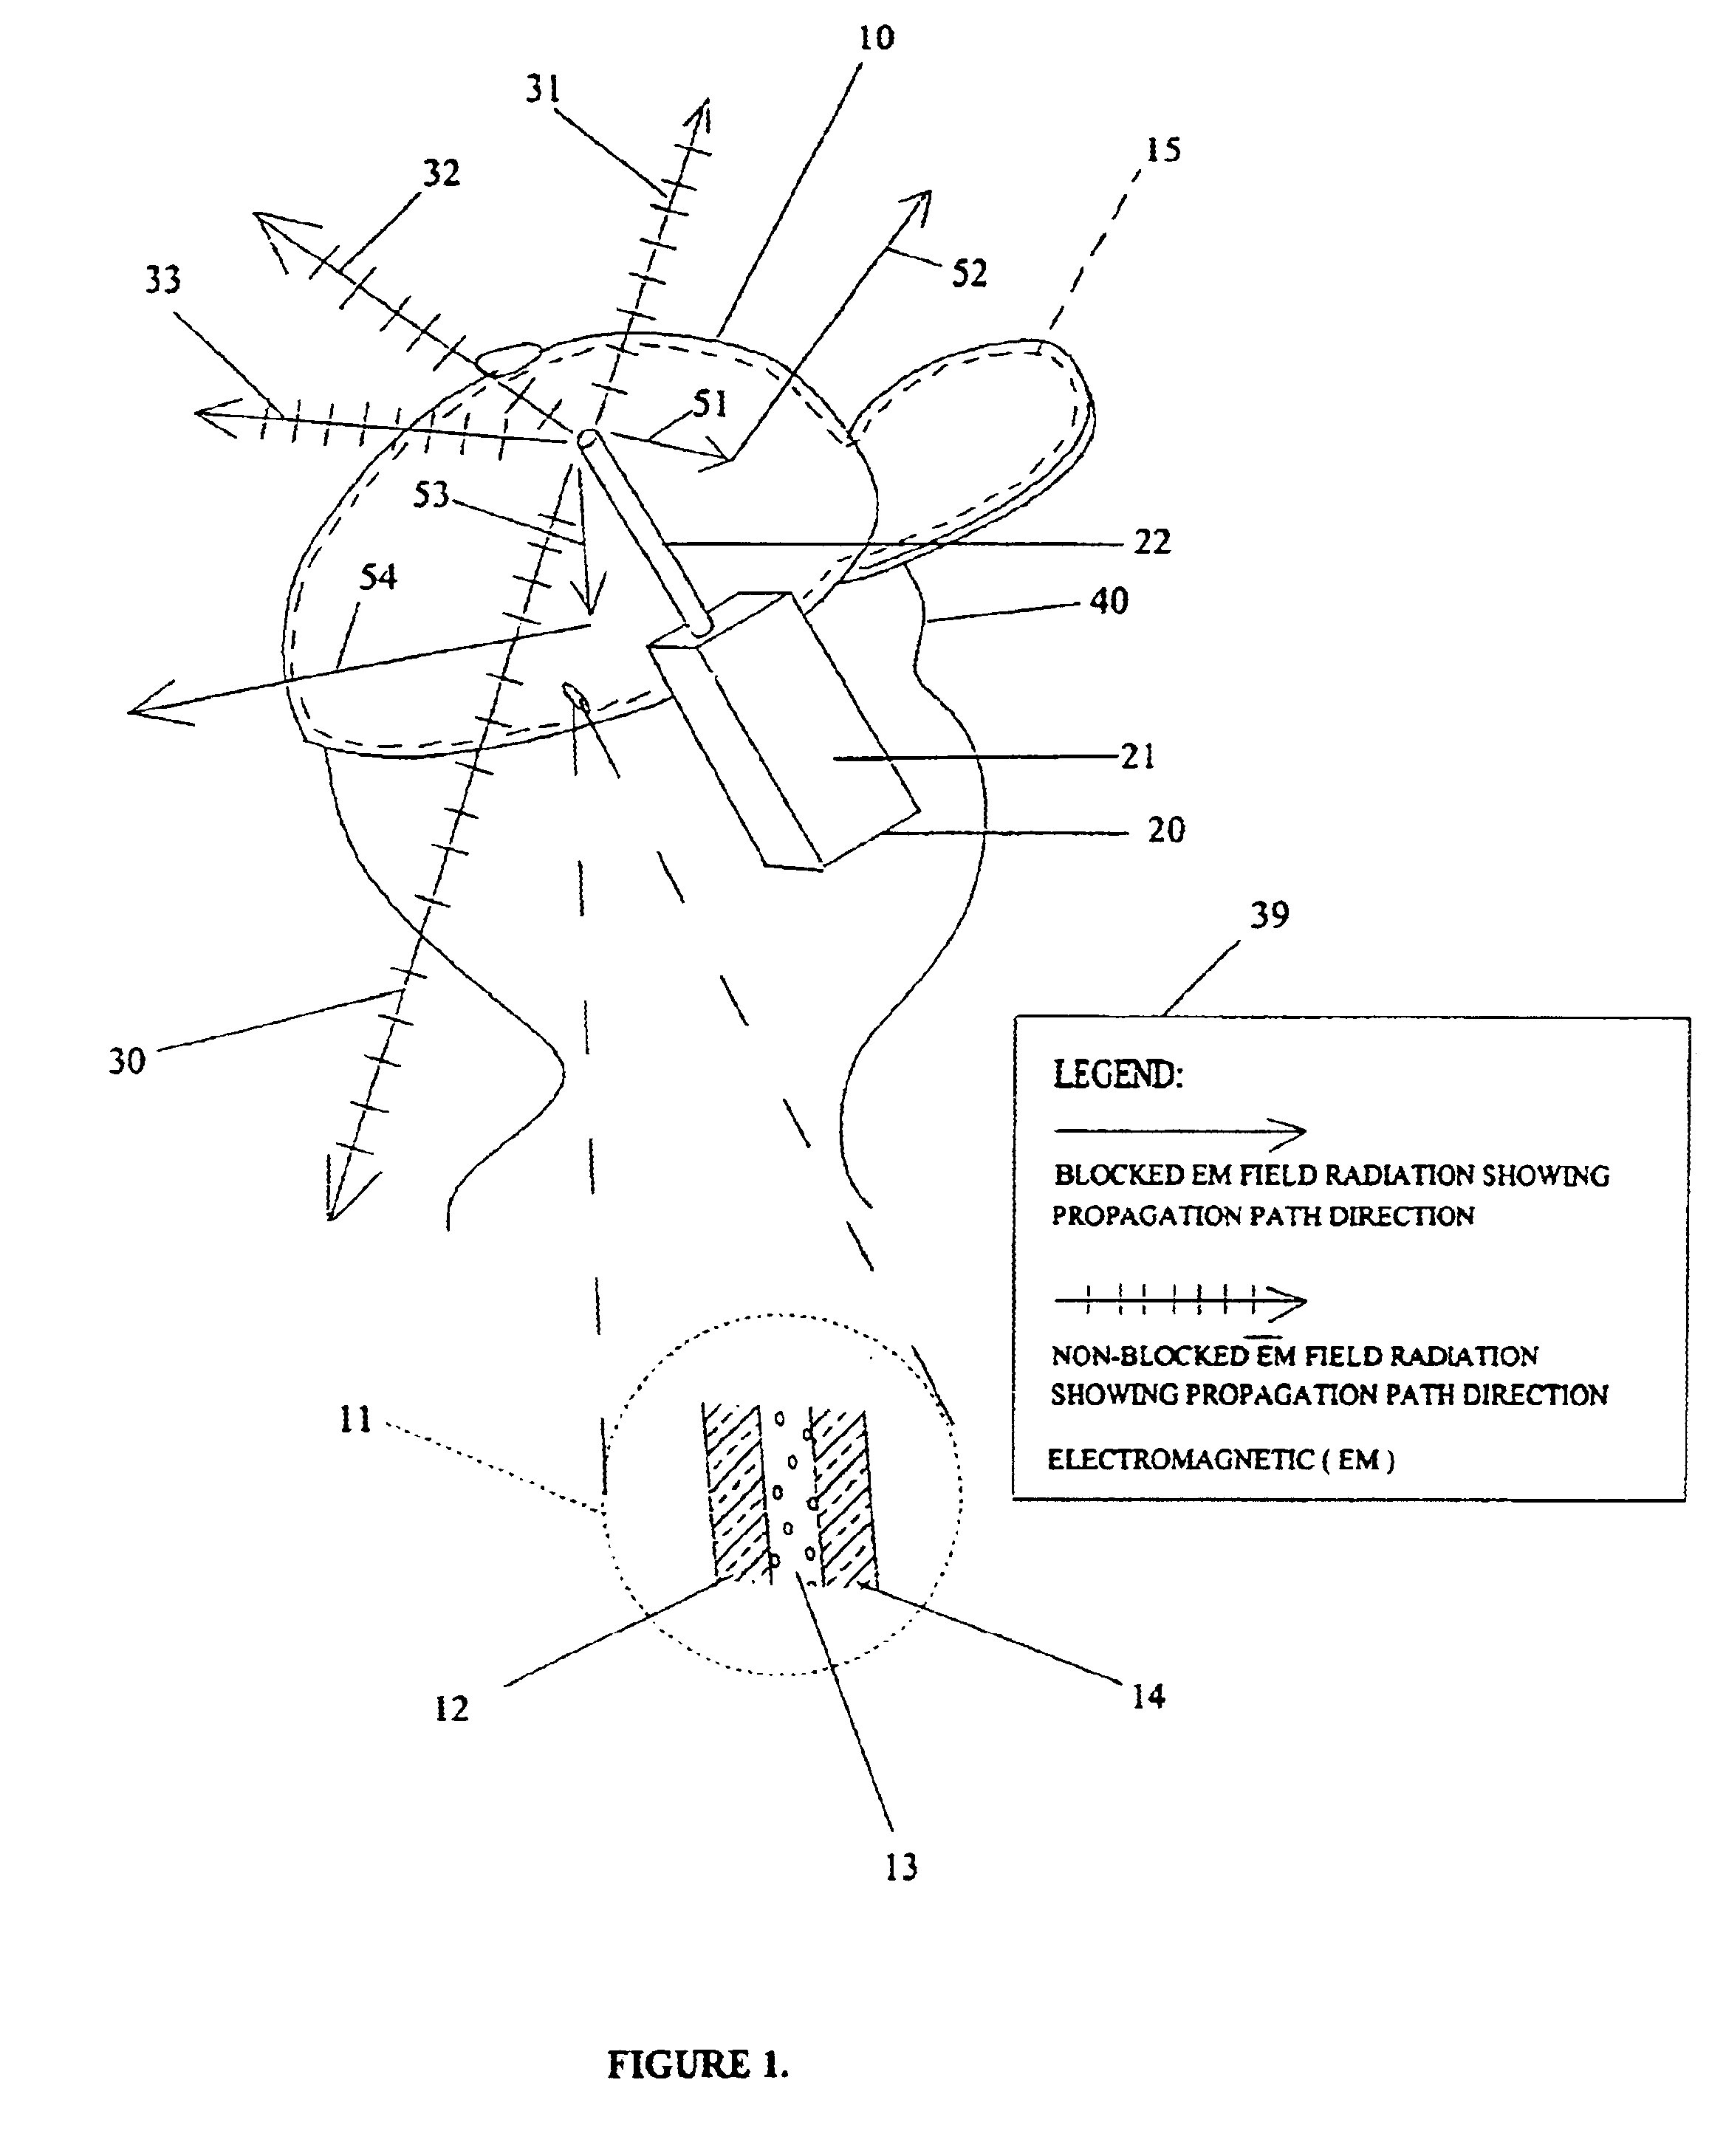 Device for radiation shielding wireless transmit/receive electronic equipment such as cellular telephones from close proximity direct line-of-sight electromagnetic fields